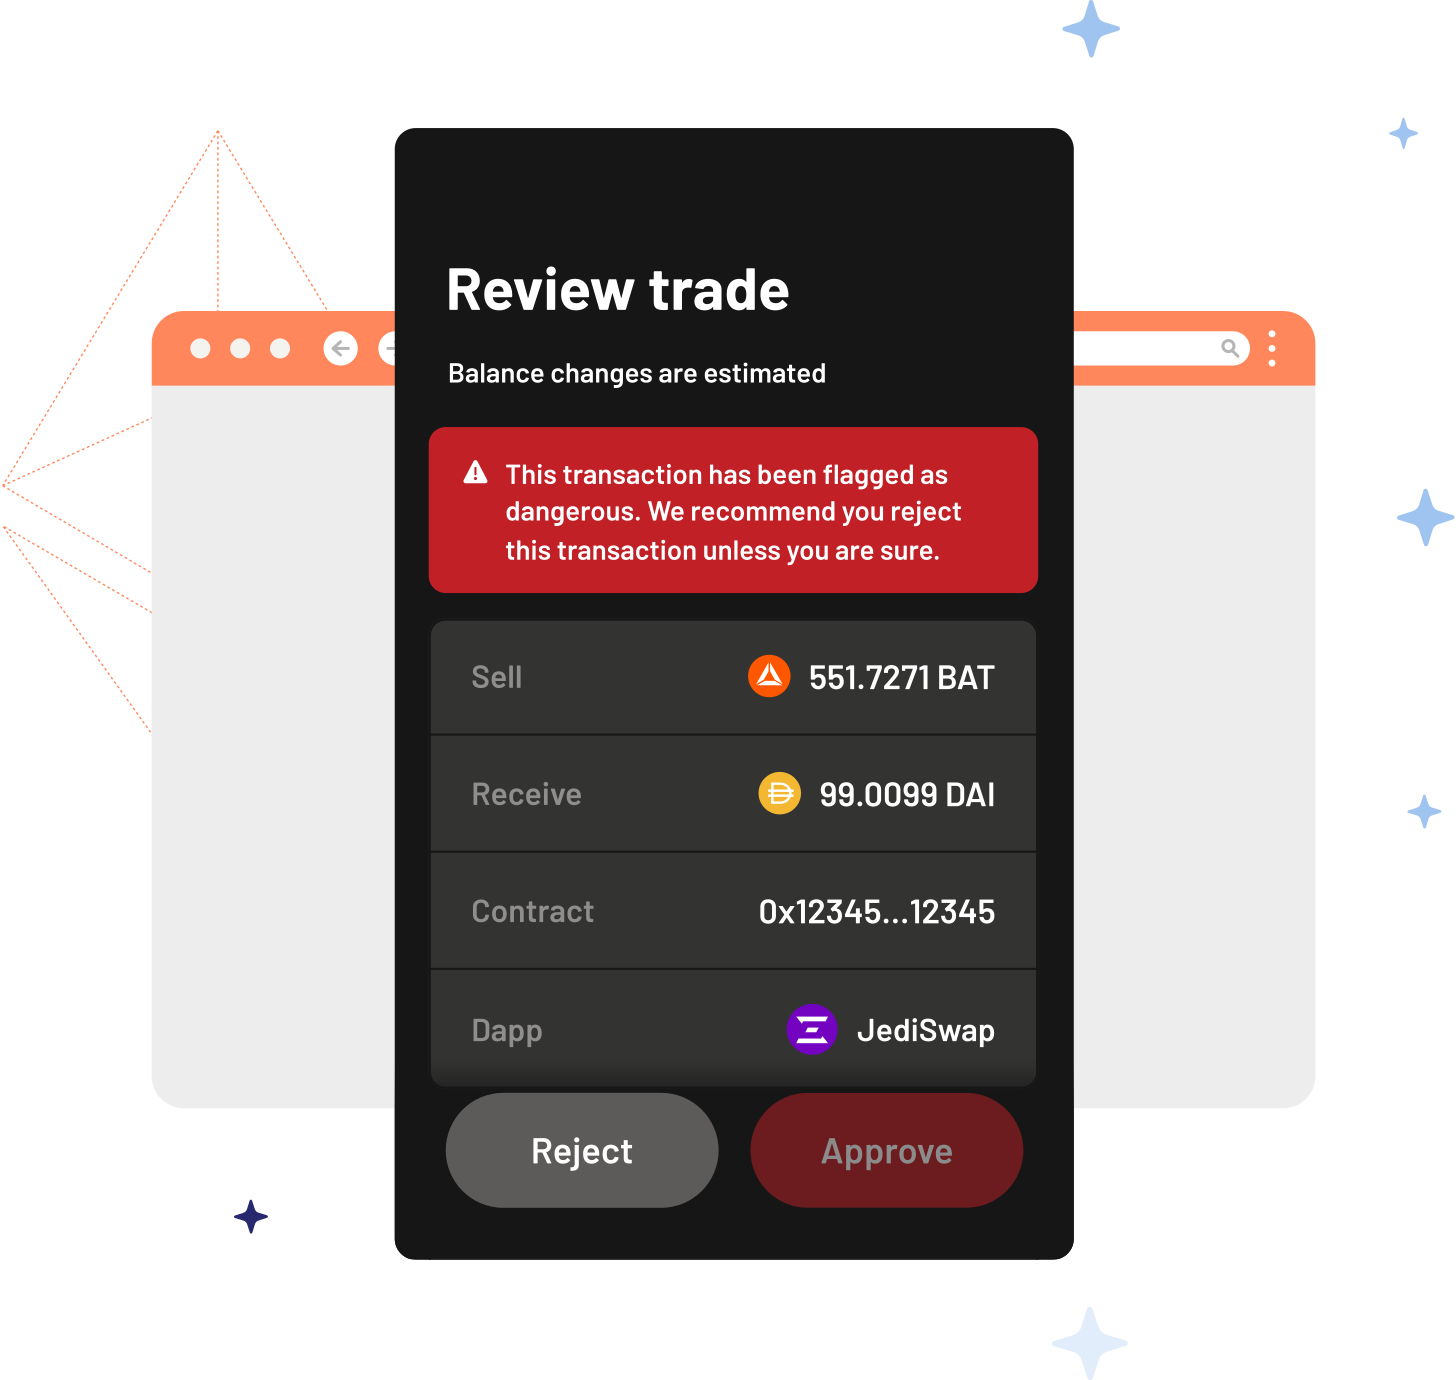 Argent X transaction review screen, with integrated fraud/scam warnings